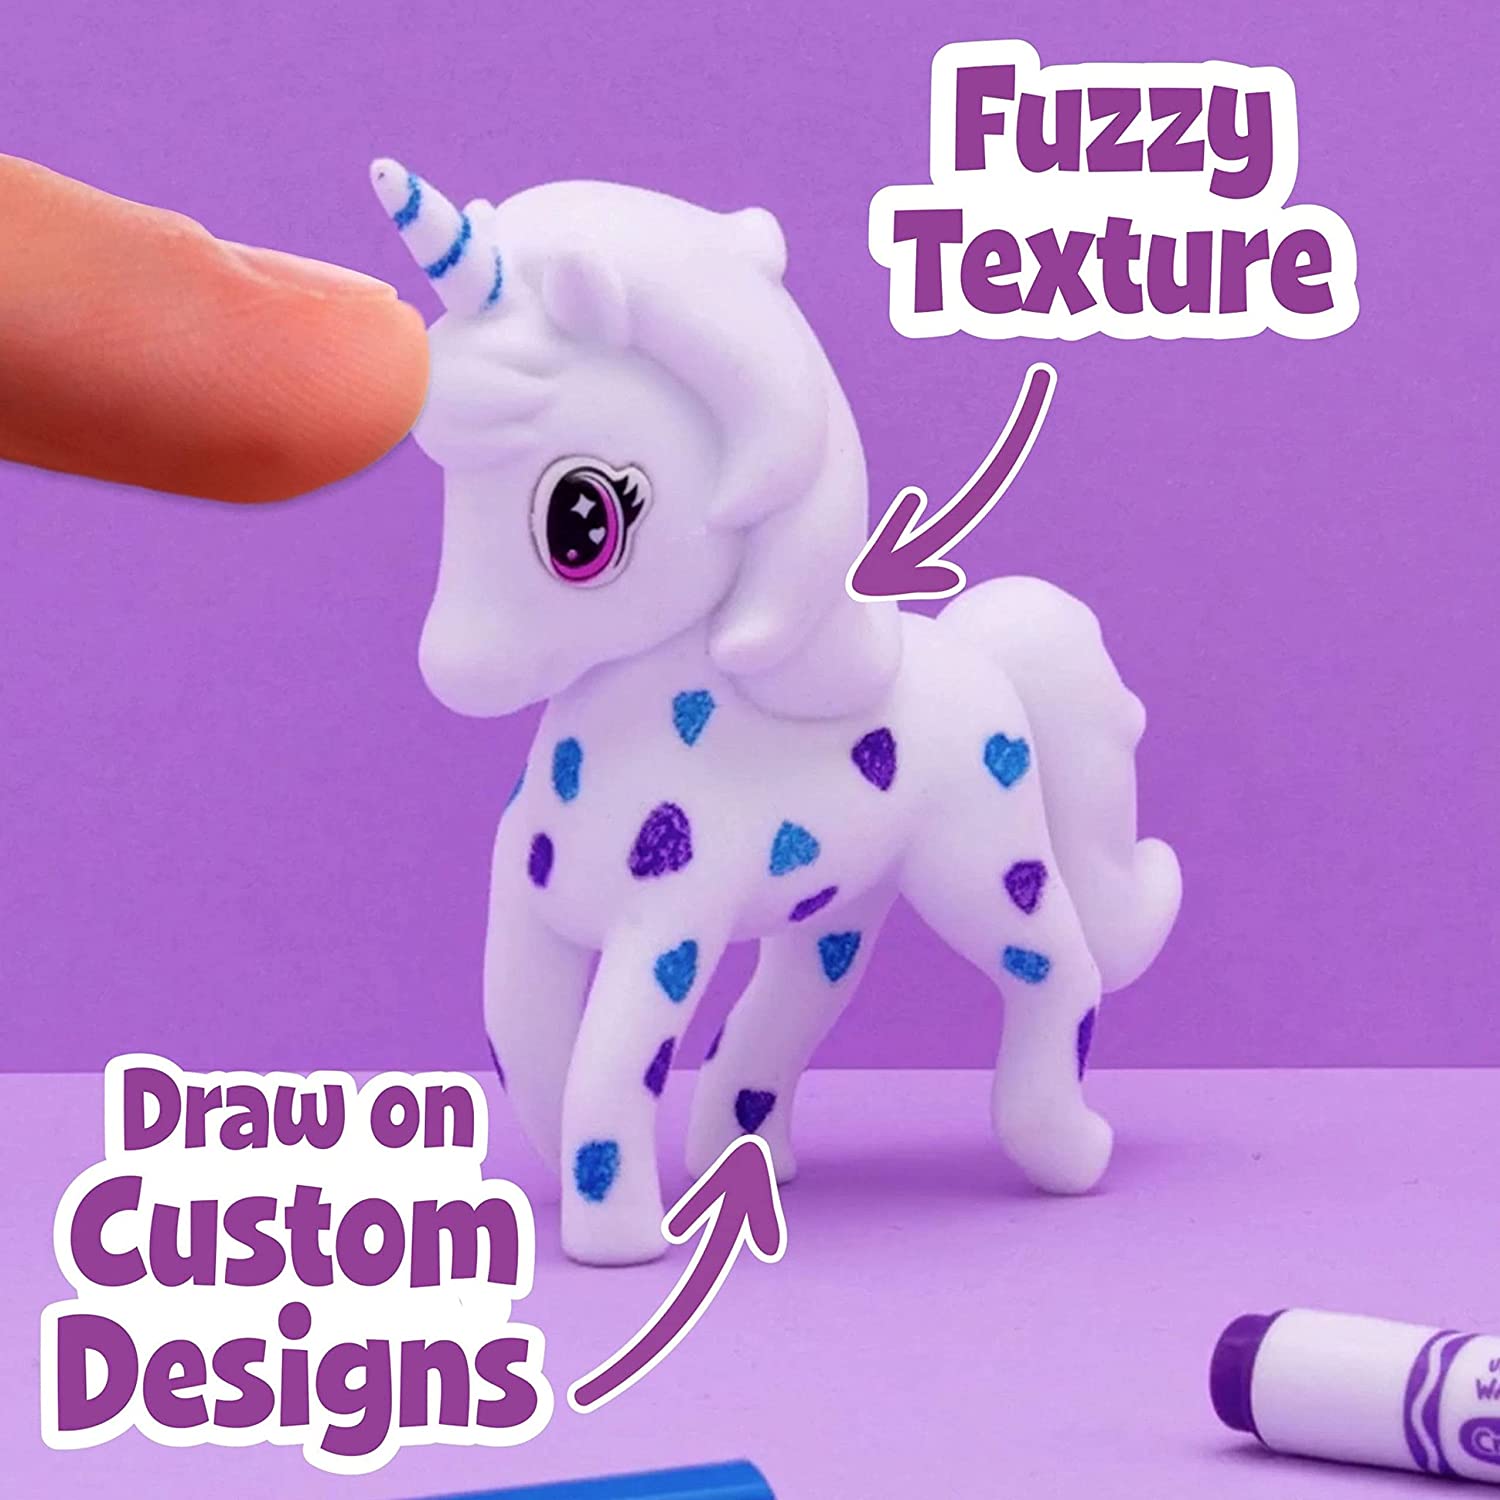 Crayola Scribble Scrubbie Peculiar Pets, Palace Playset with Yeti & Unicorn  Toys, Kids Gifts for Girls & Boys, Ages 3, 4, 5, 6